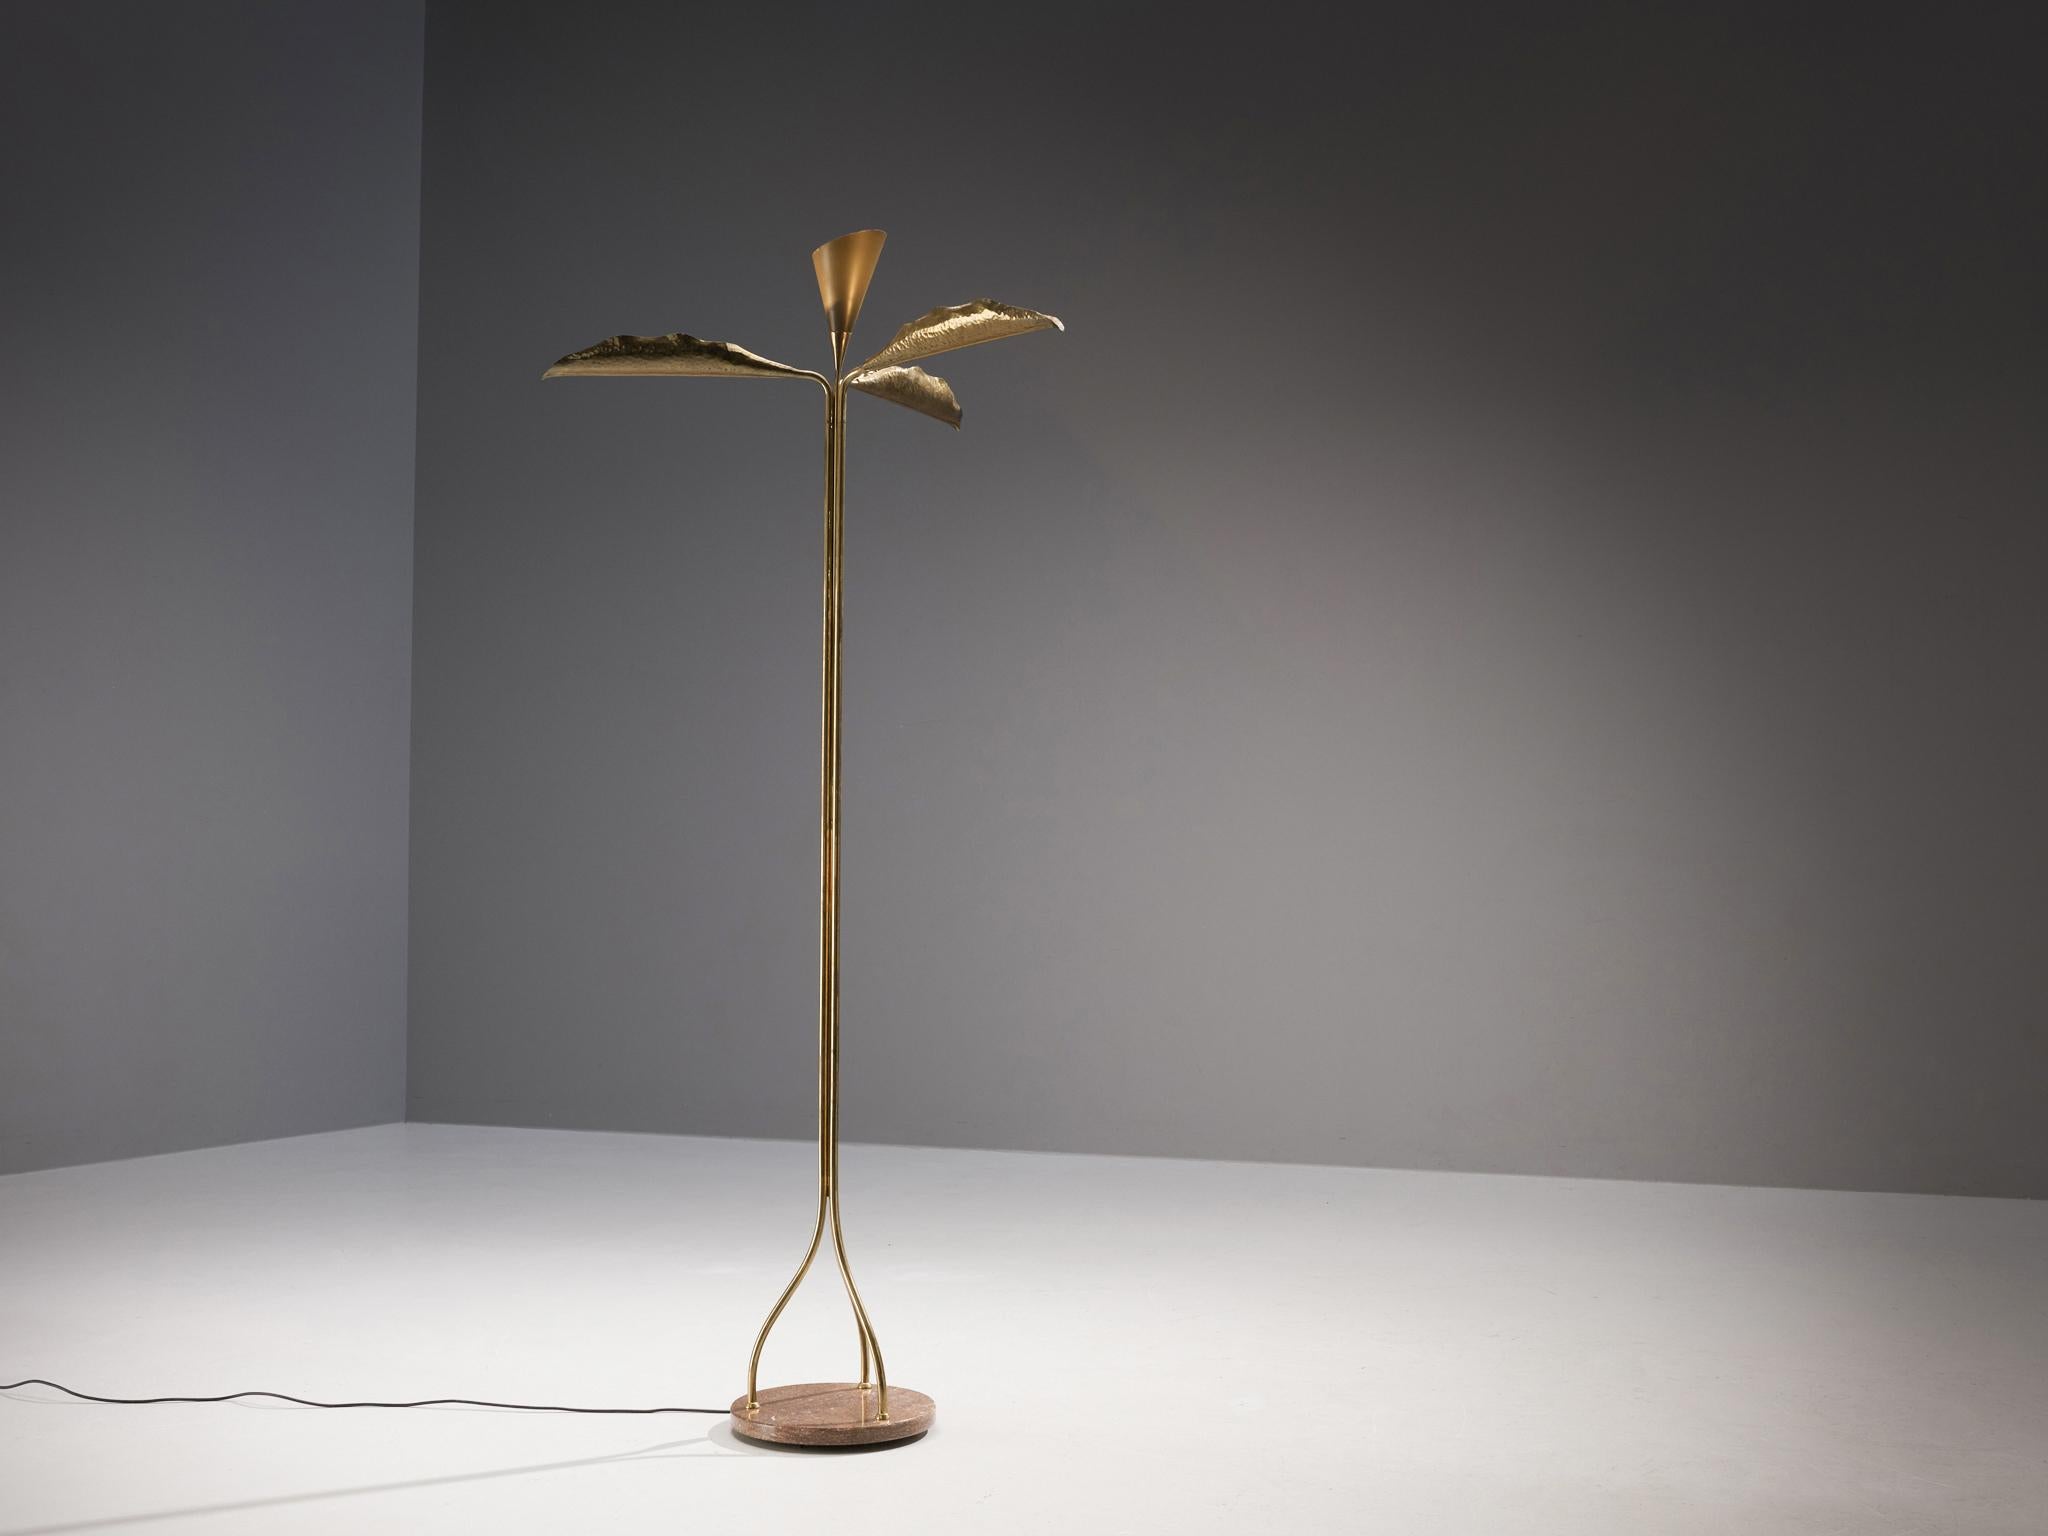 Angelo Lelii for Arredoluce, floor lamp, marble, brass, aluminum, Italy, circa 1951.

This rare floor lamp by Angelo Lelii presents an organic composition consisting of three leaves in hammered brass that open towards the ceiling and surround the